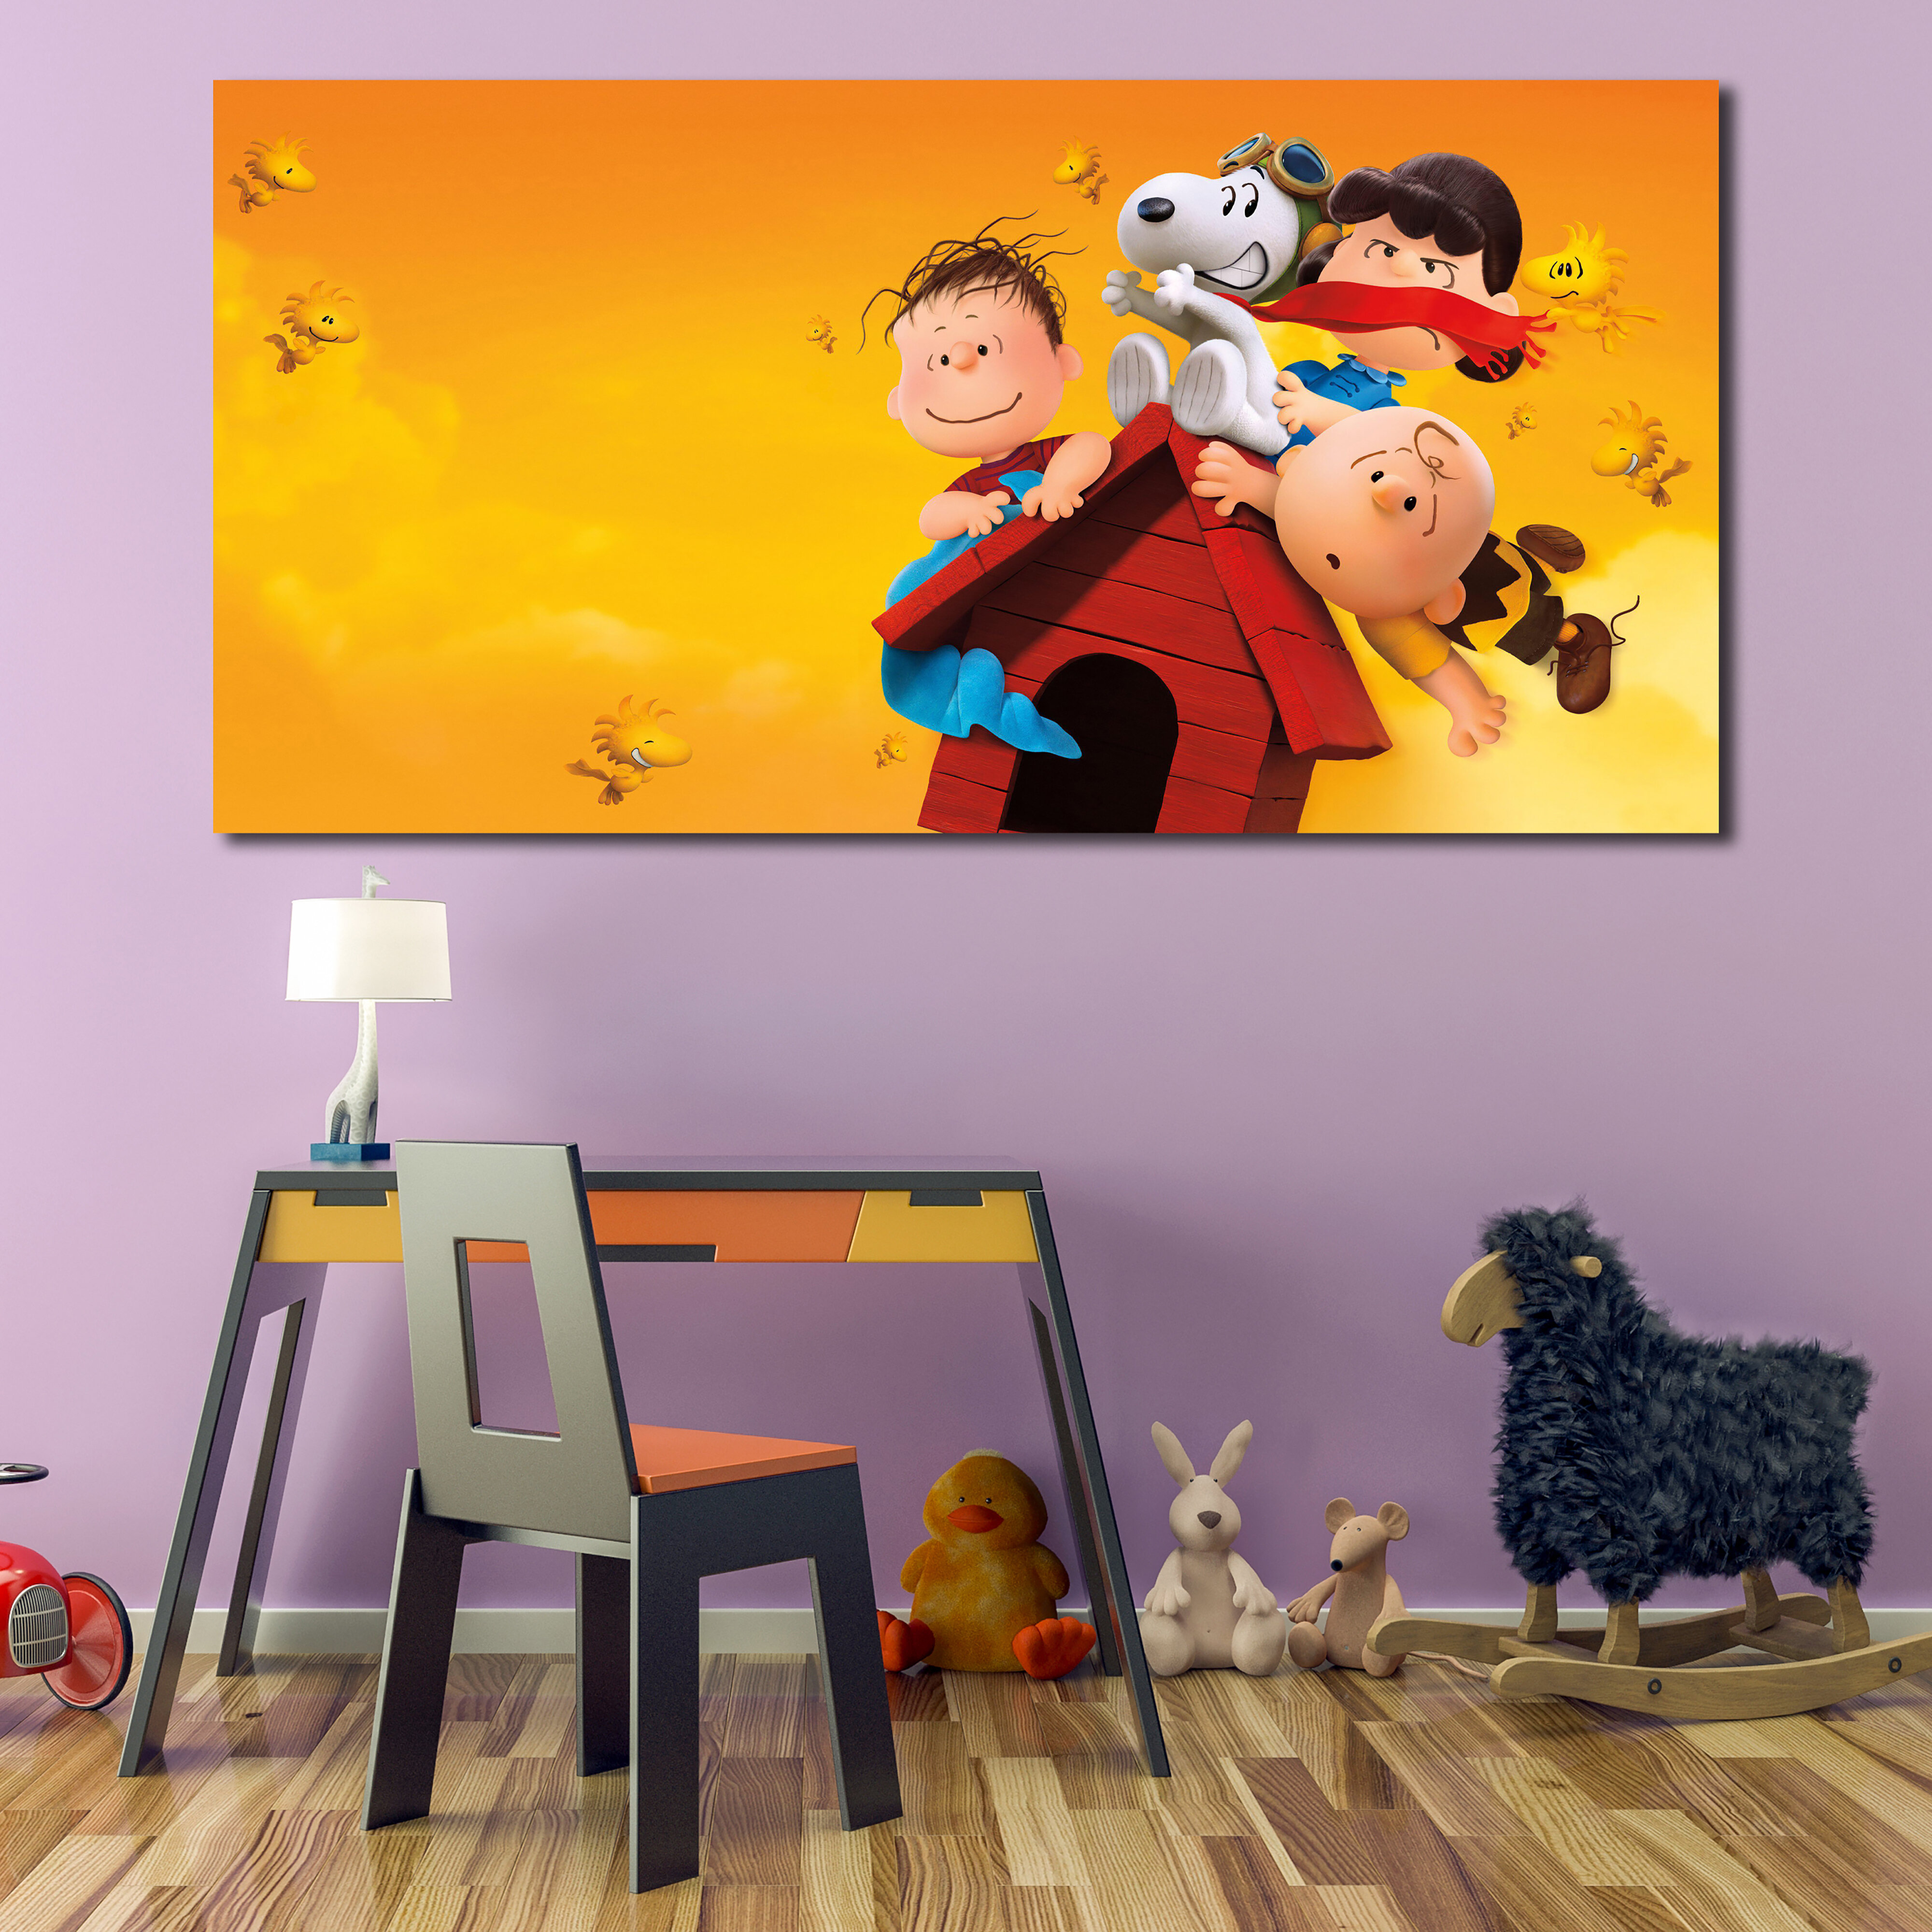 Charlie S Friends and Snoopy Movie Entertainment The Peanut Woodstock Pigpen Dog House Lucy Canvas Wall Art Decor Print Sticker Woodymood Format: Pape